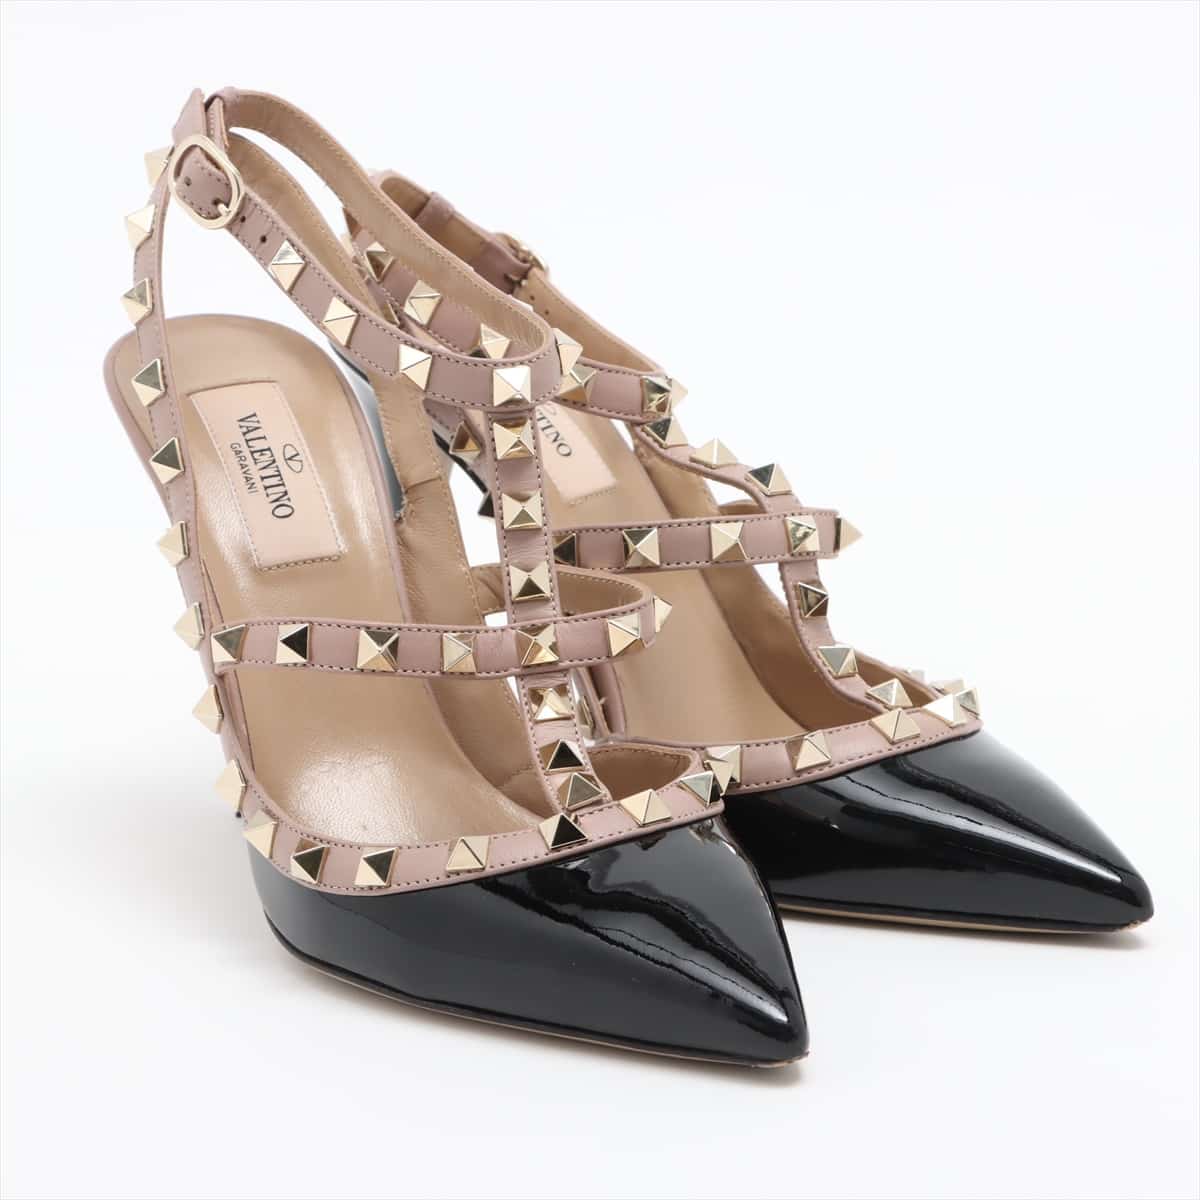 Valentino Garavani Leather & patent Pumps 38 Ladies' black x beige There is a lift change Spare studs available